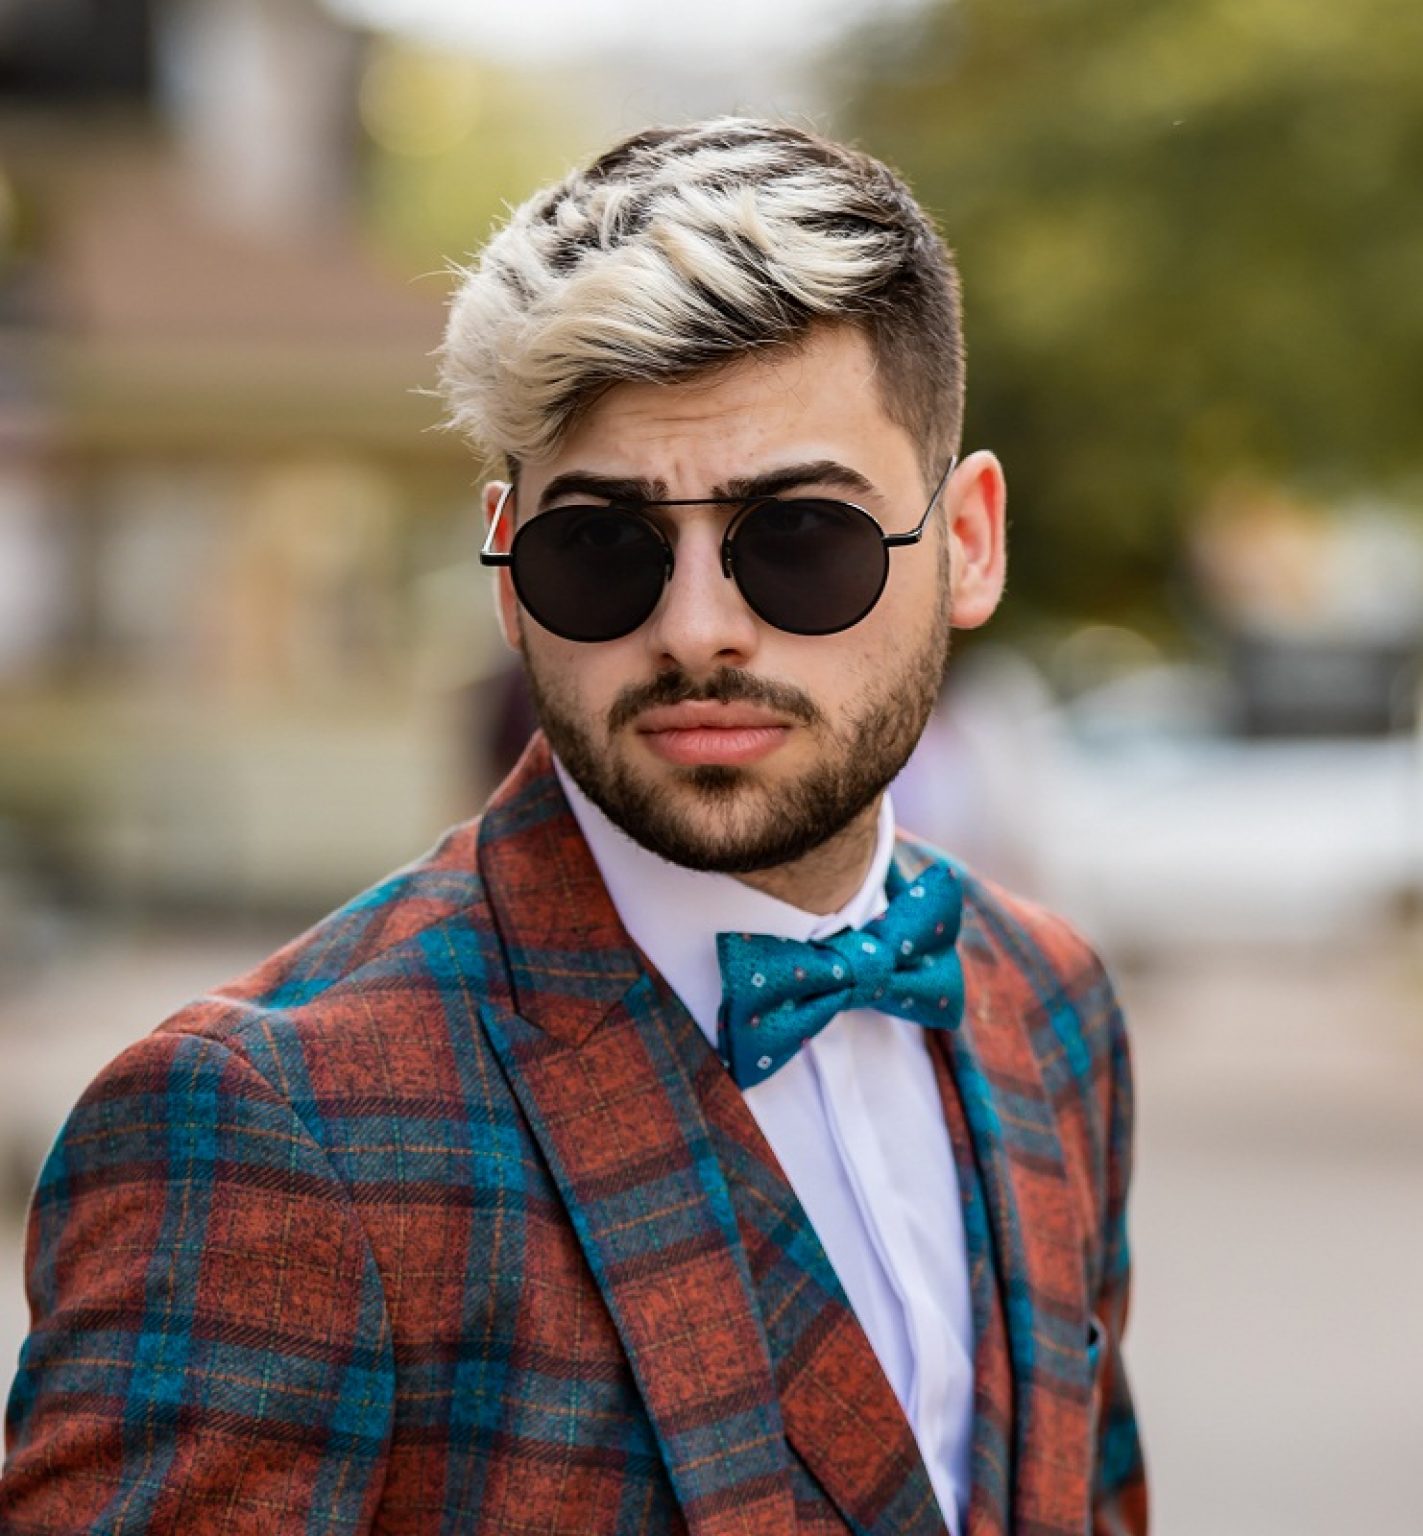 Hipster Haircut For Men 5 1423x1536 